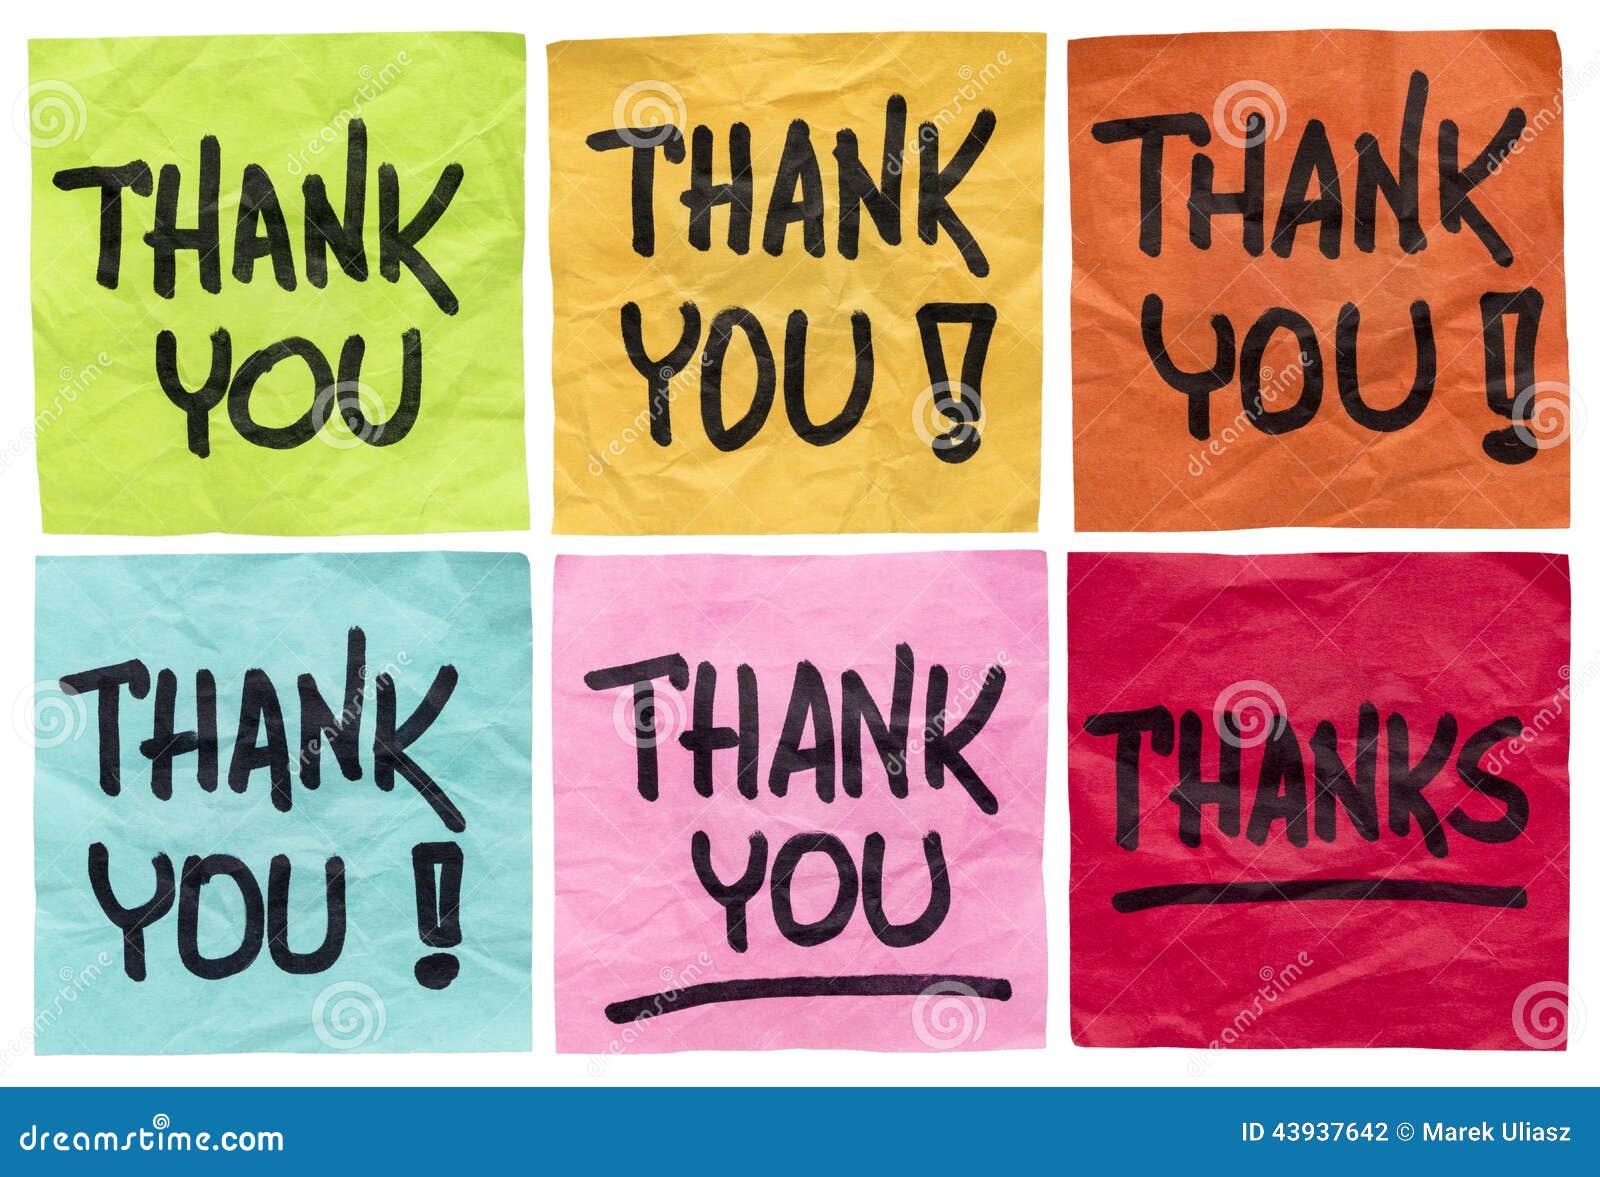 7 414 Thank Thanks You Photos Free Royalty Free Stock Photos From Dreamstime